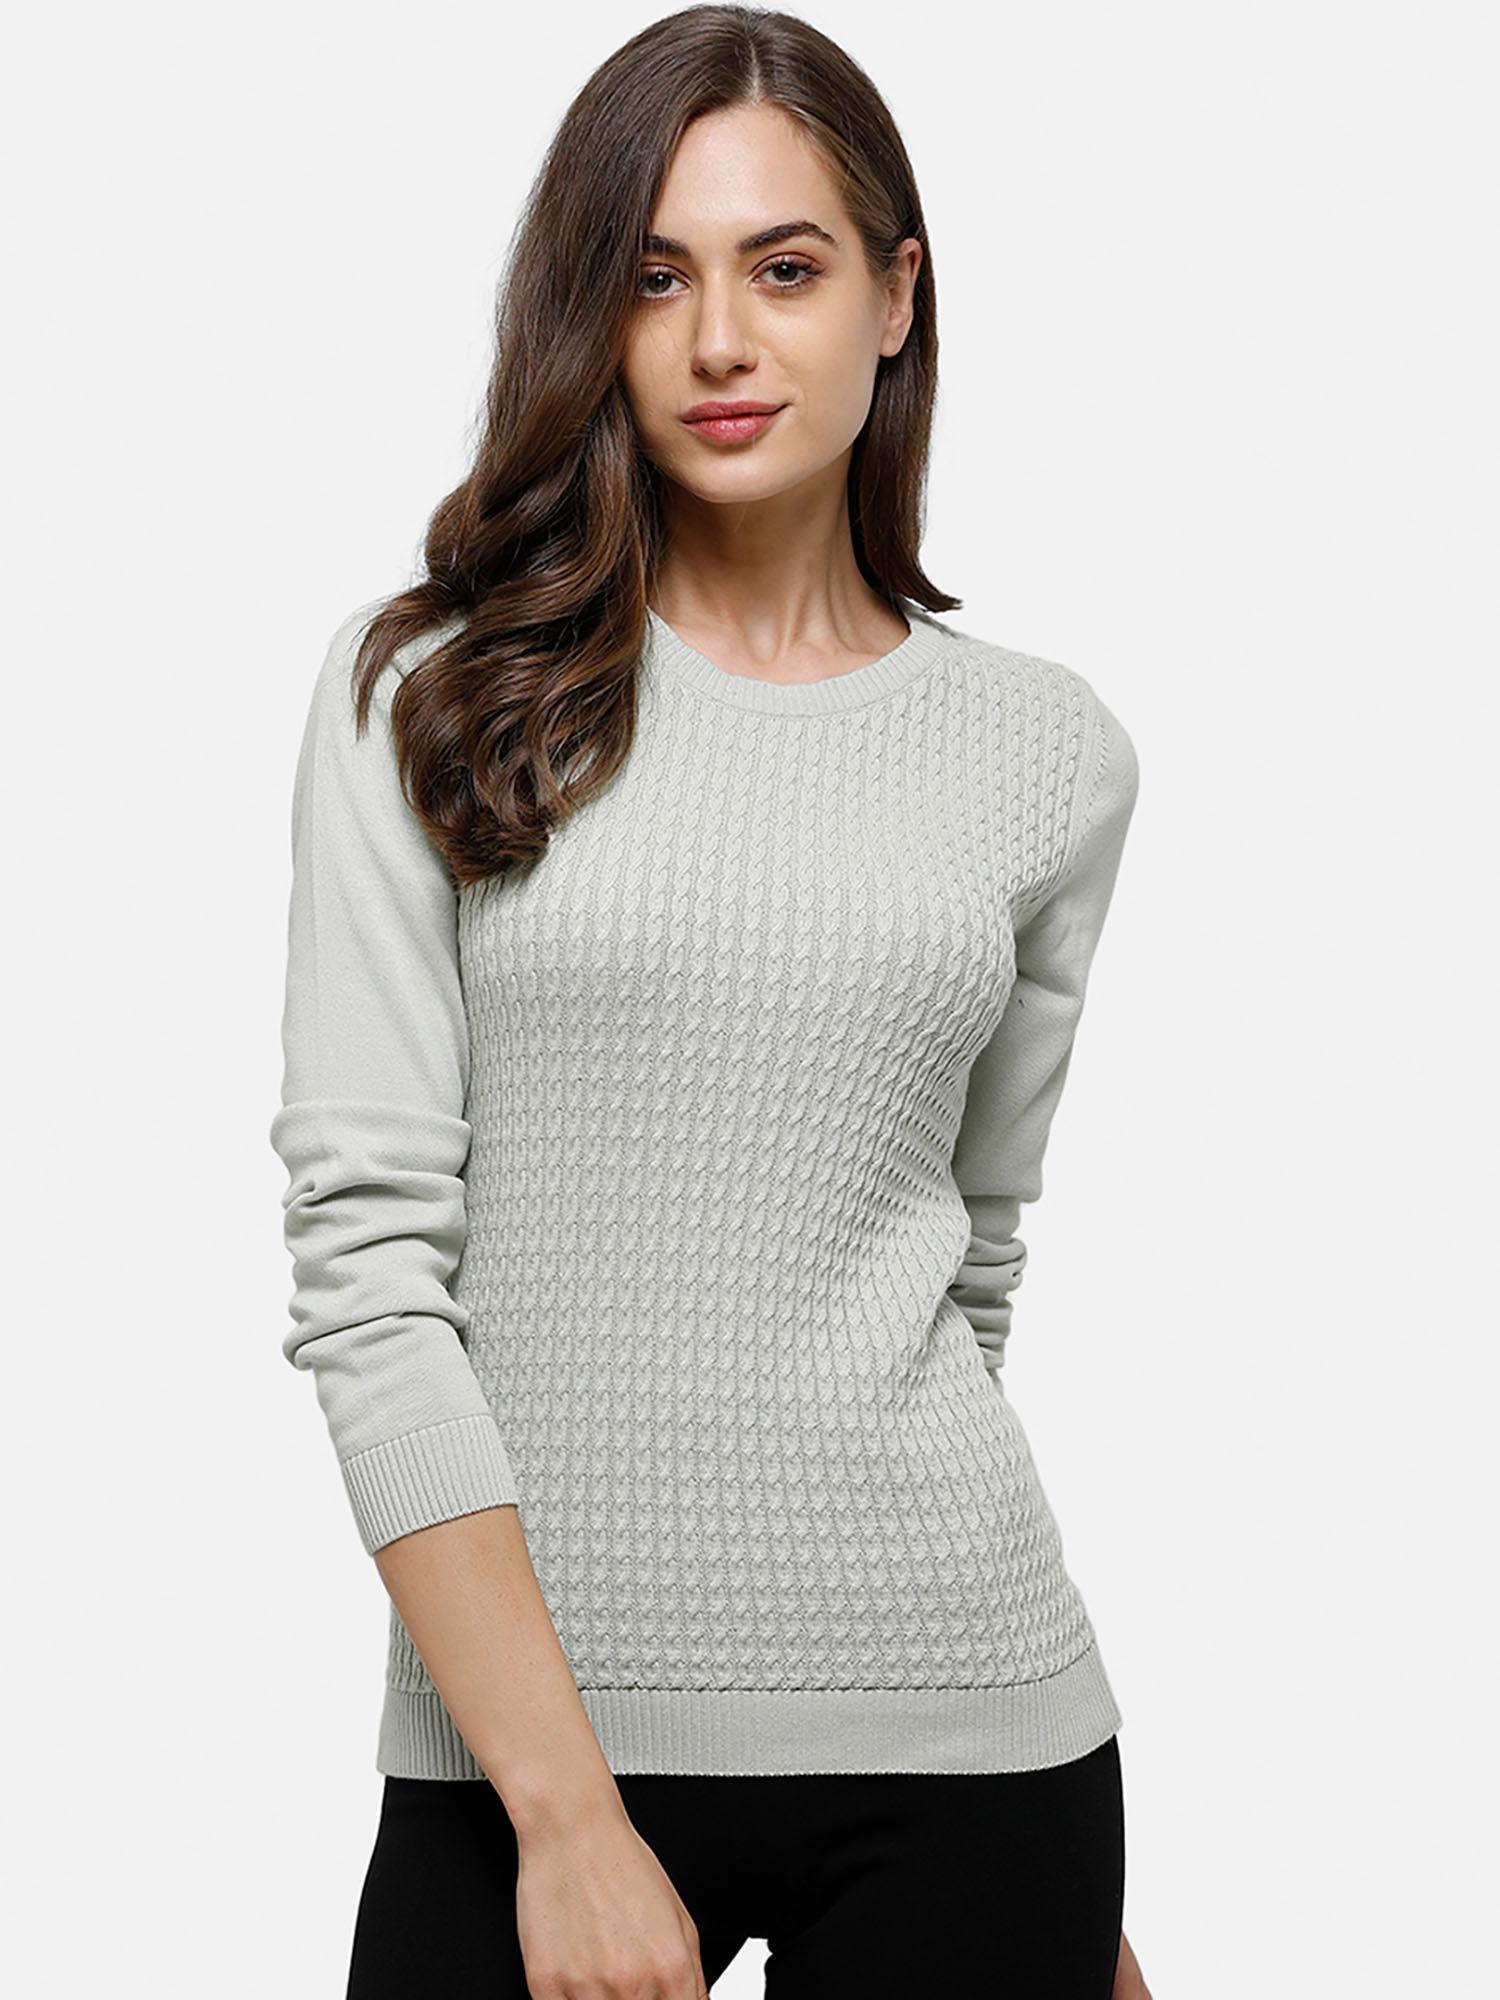 98 degree north's grey full sleeves sweater